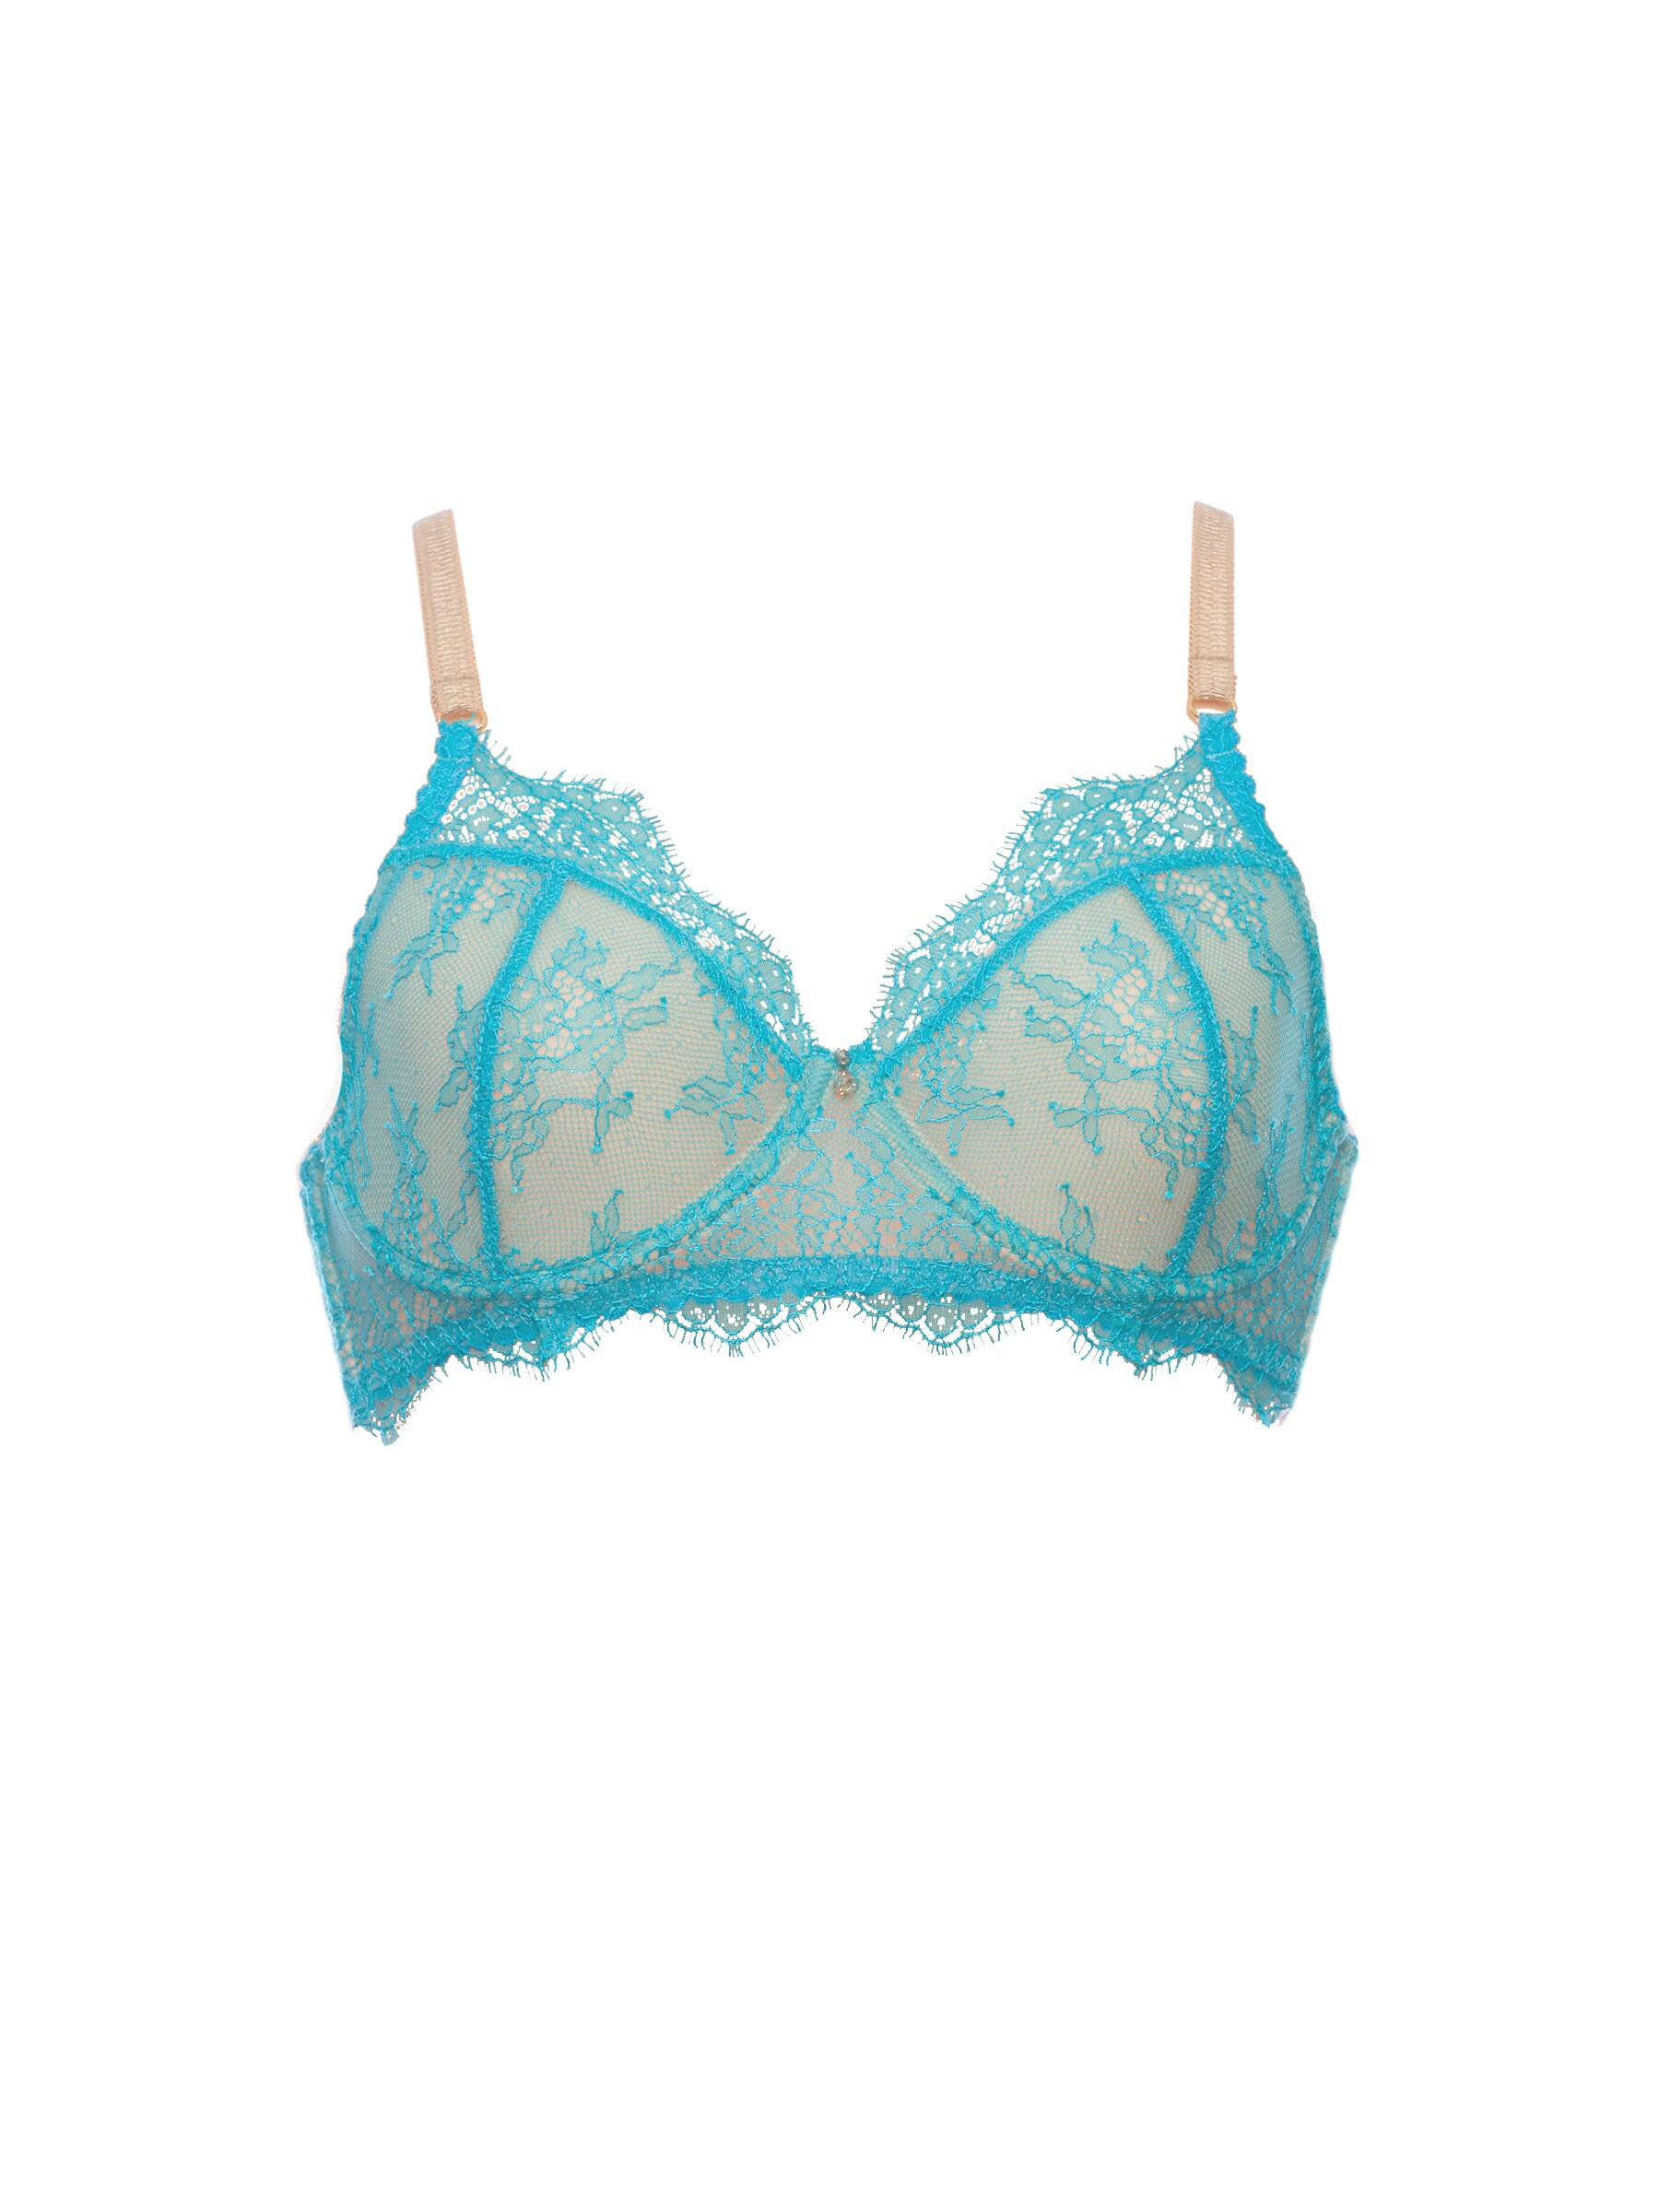 Turquoise Lace Underwire Bra, Soft Cups Bright Blue Brasseire 